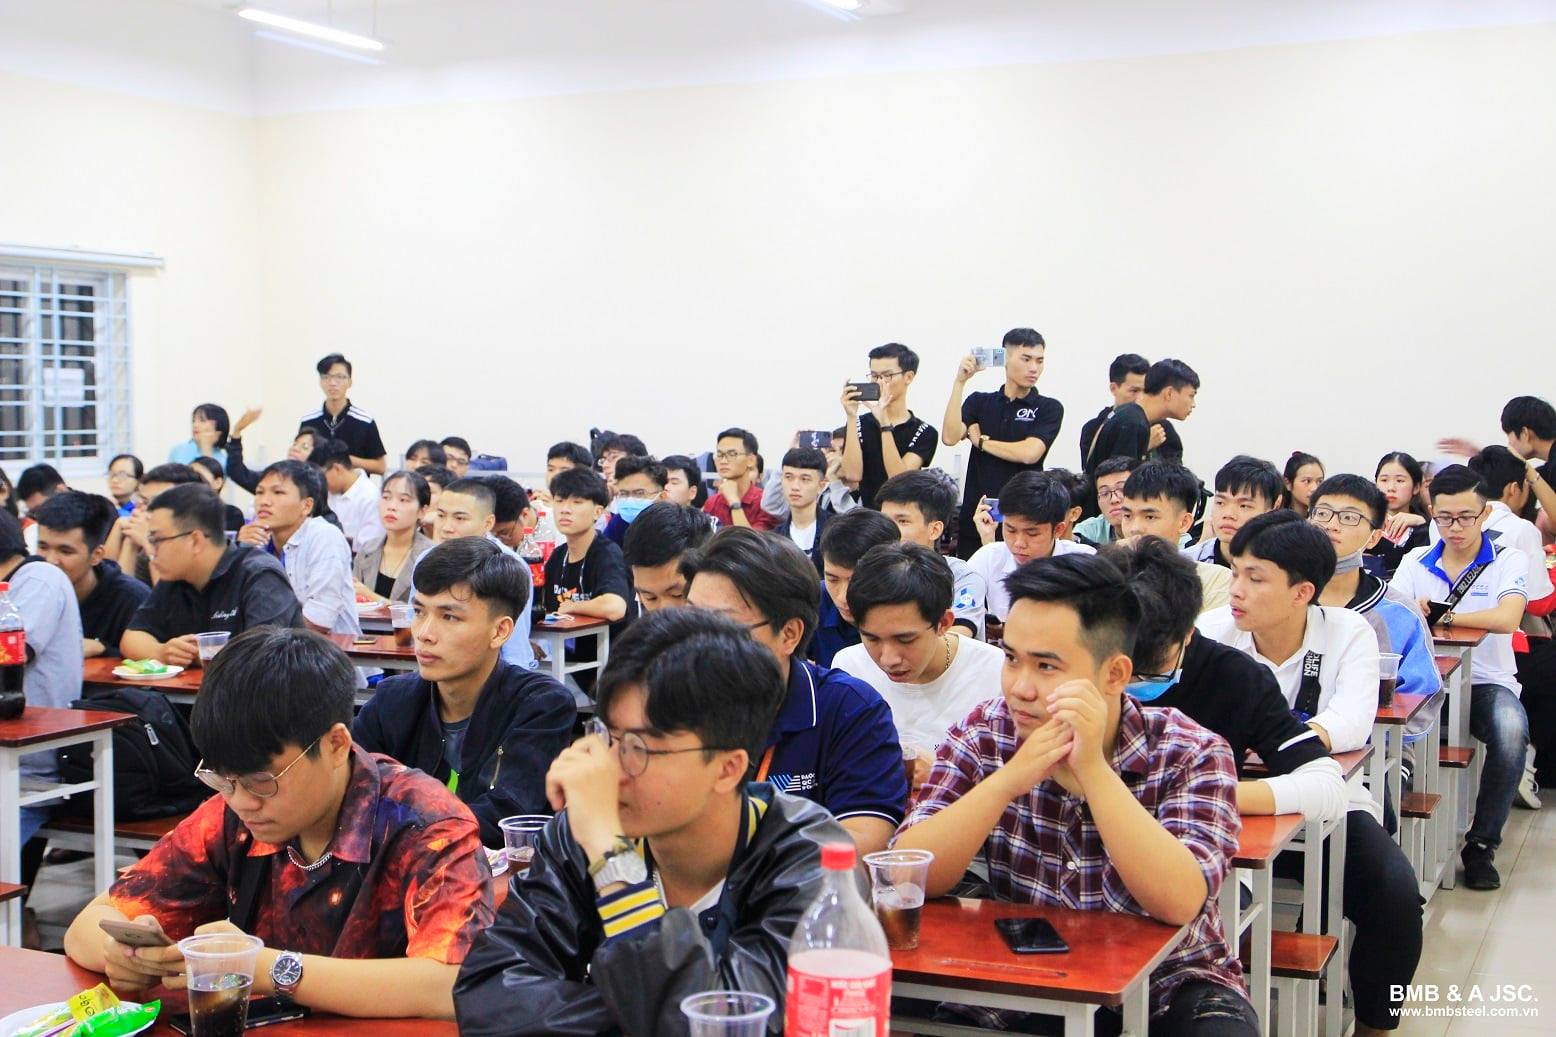 BMB Steel accompanies students of the Faculty of Civil Engineering 7